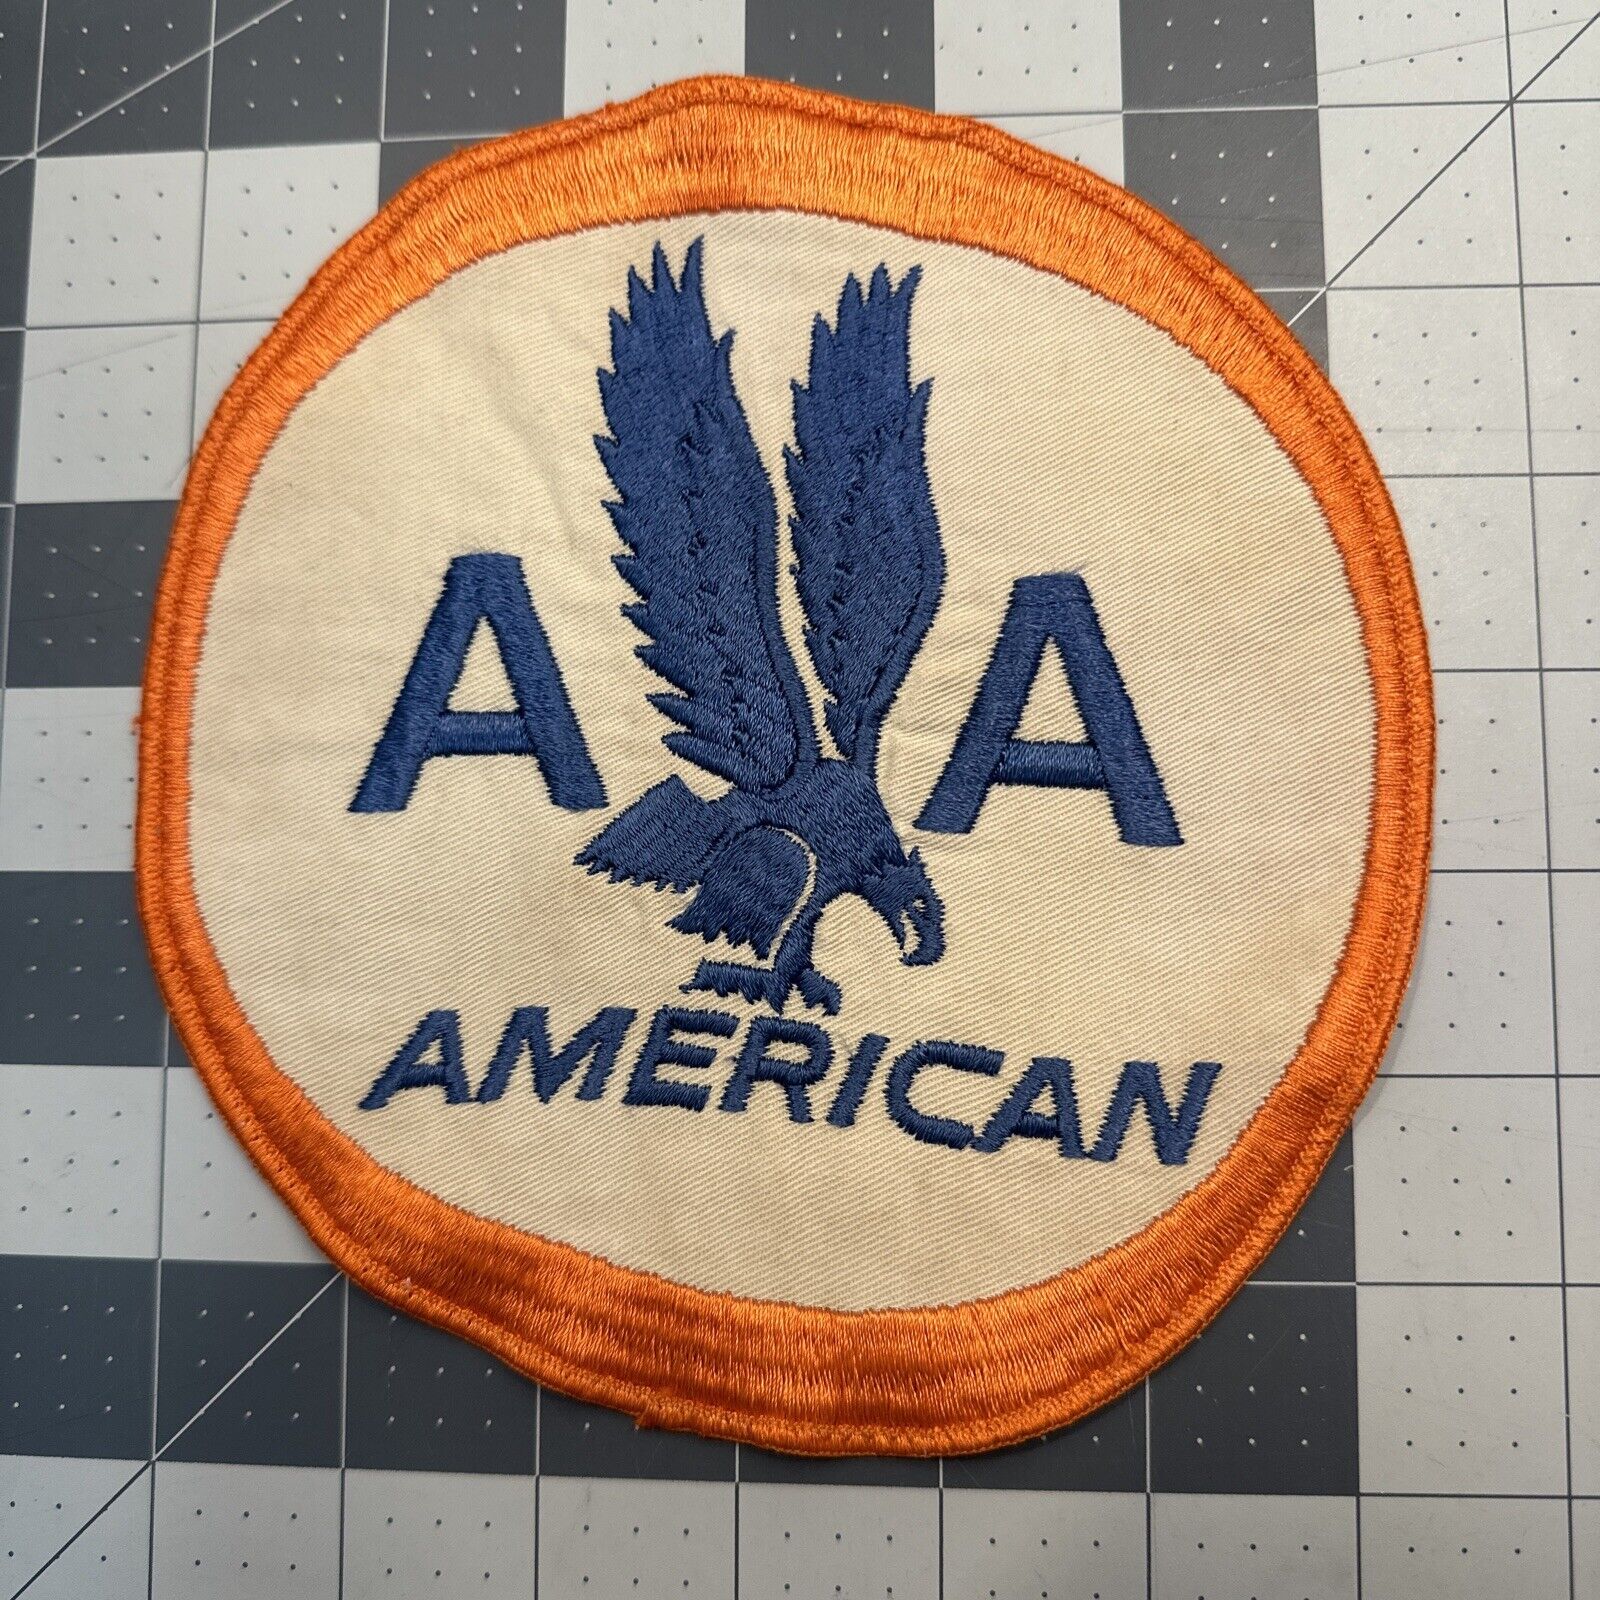 VTG AMERICAN AIRLINES 6.5” Embroidered Jacket Patch 1962-67 Never Used